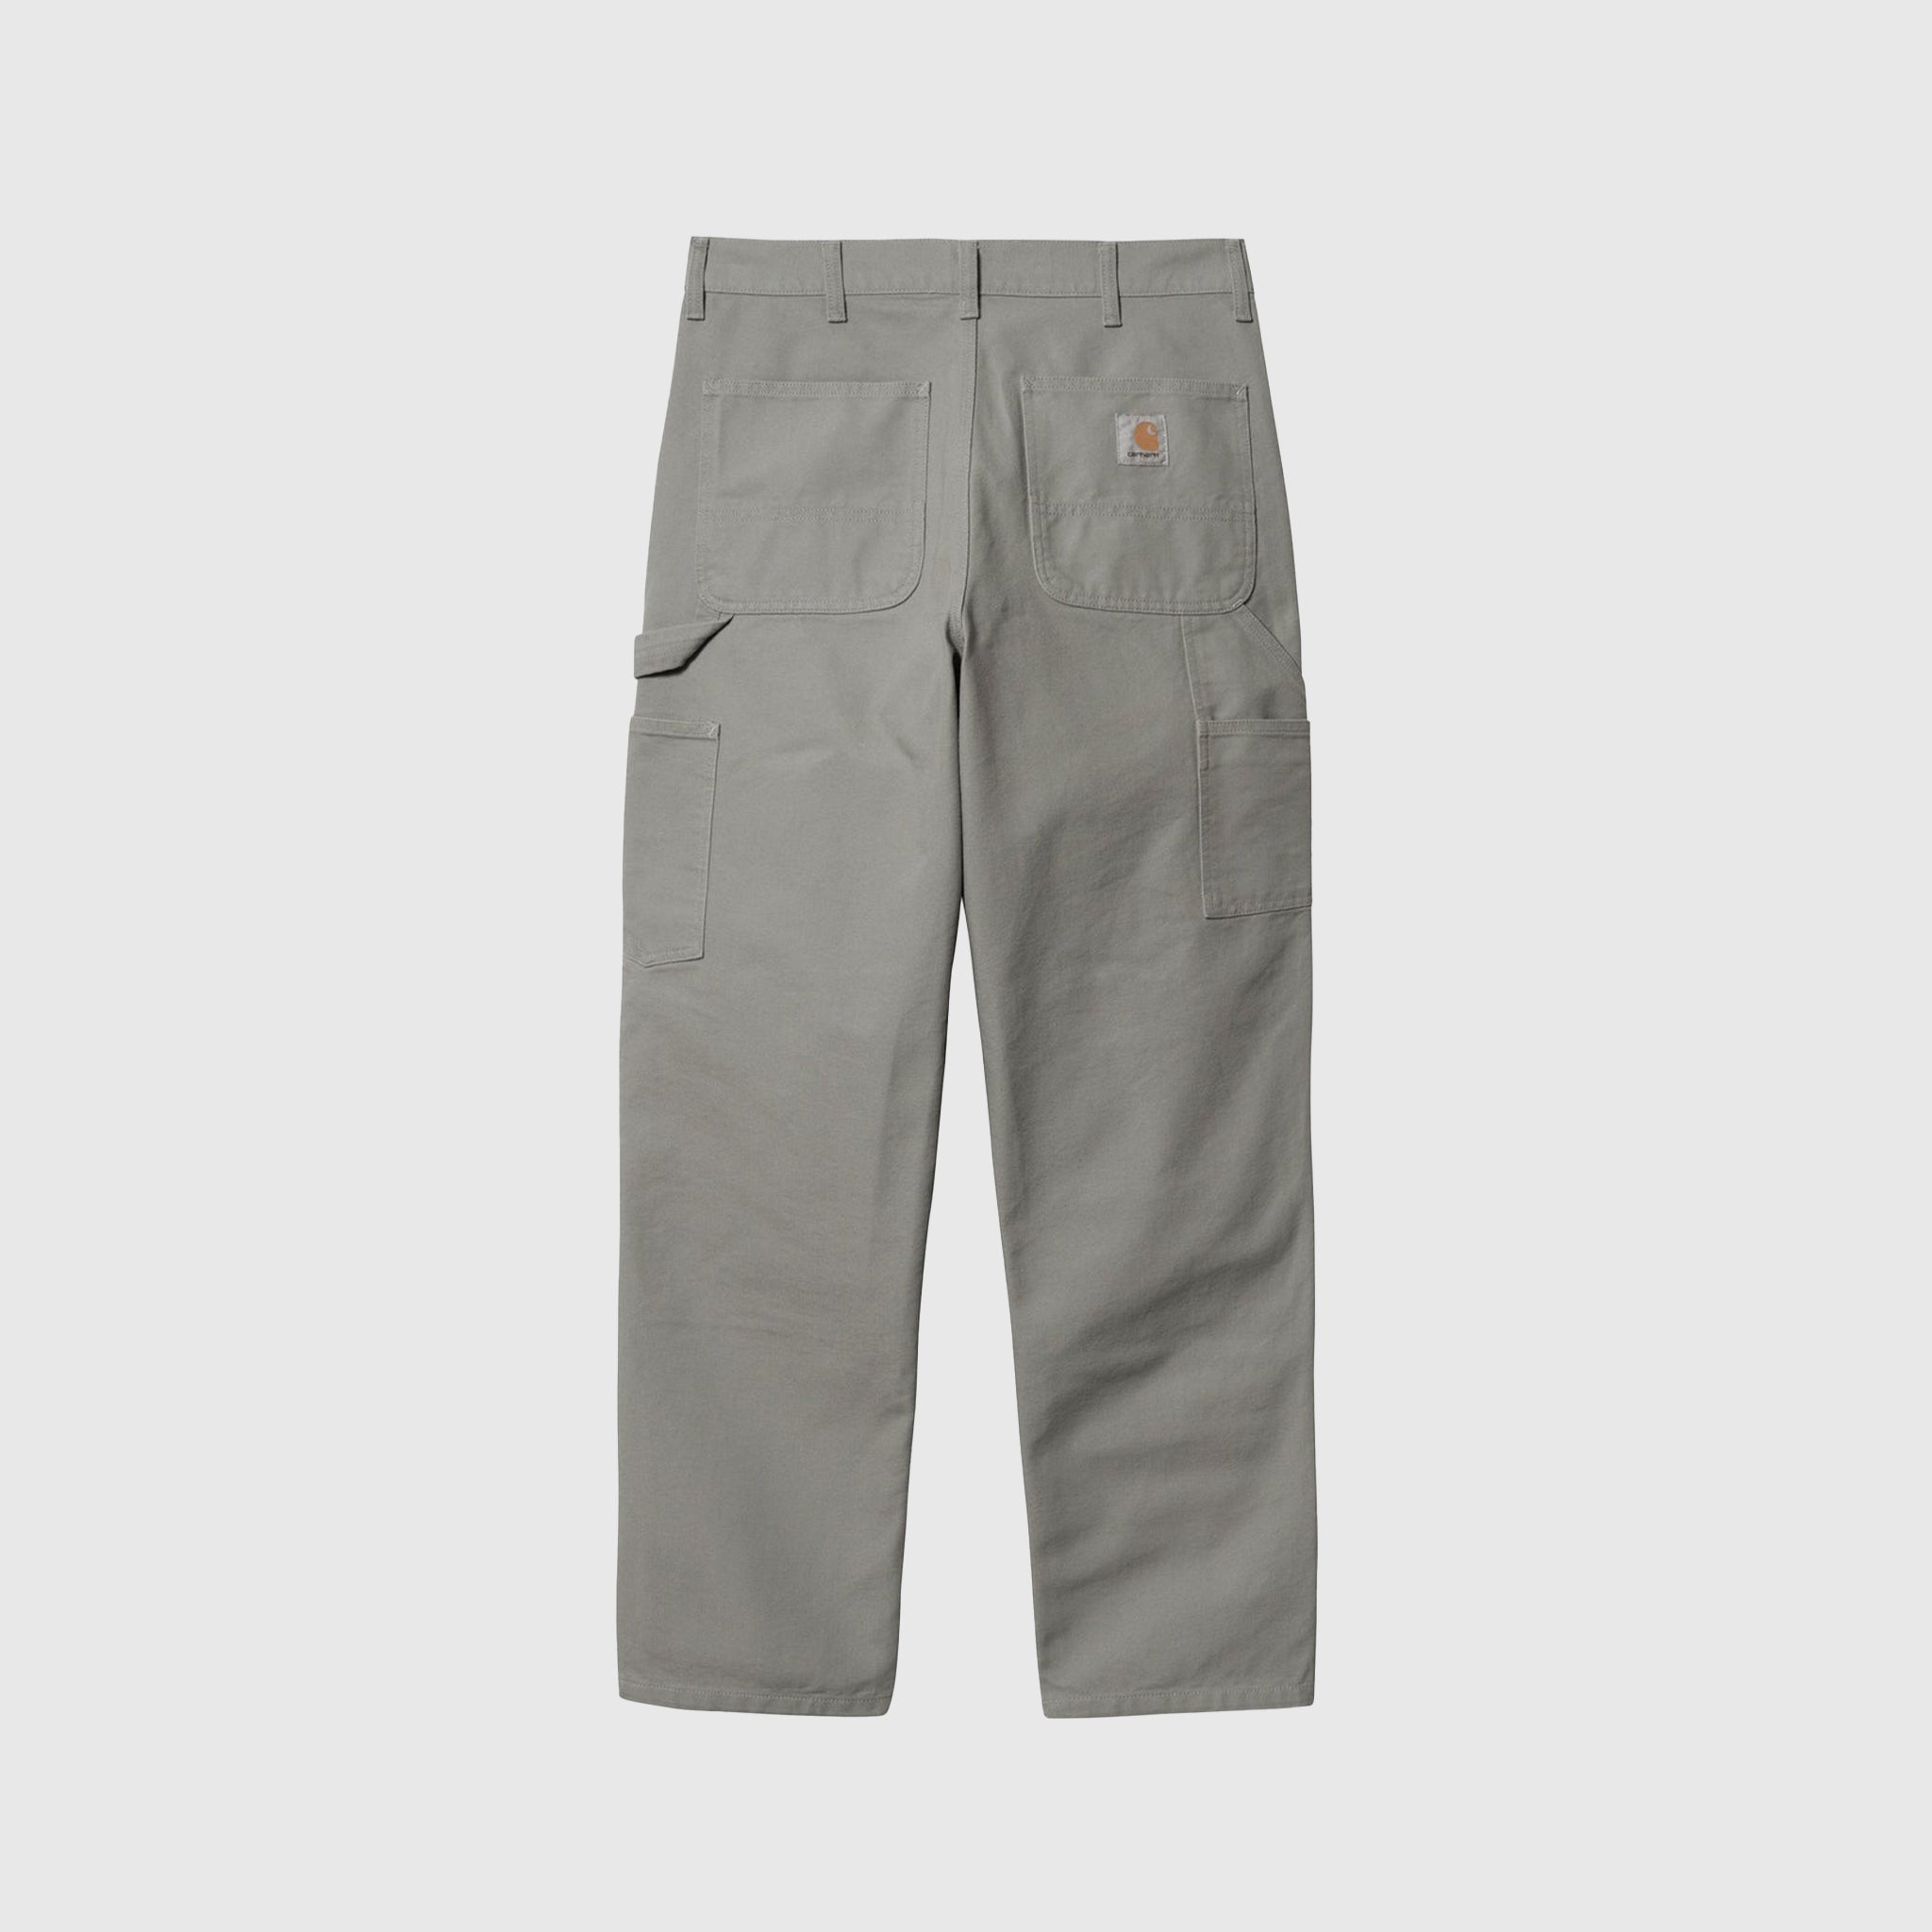 DOUBLE KNEE PANT – PACKER SHOES